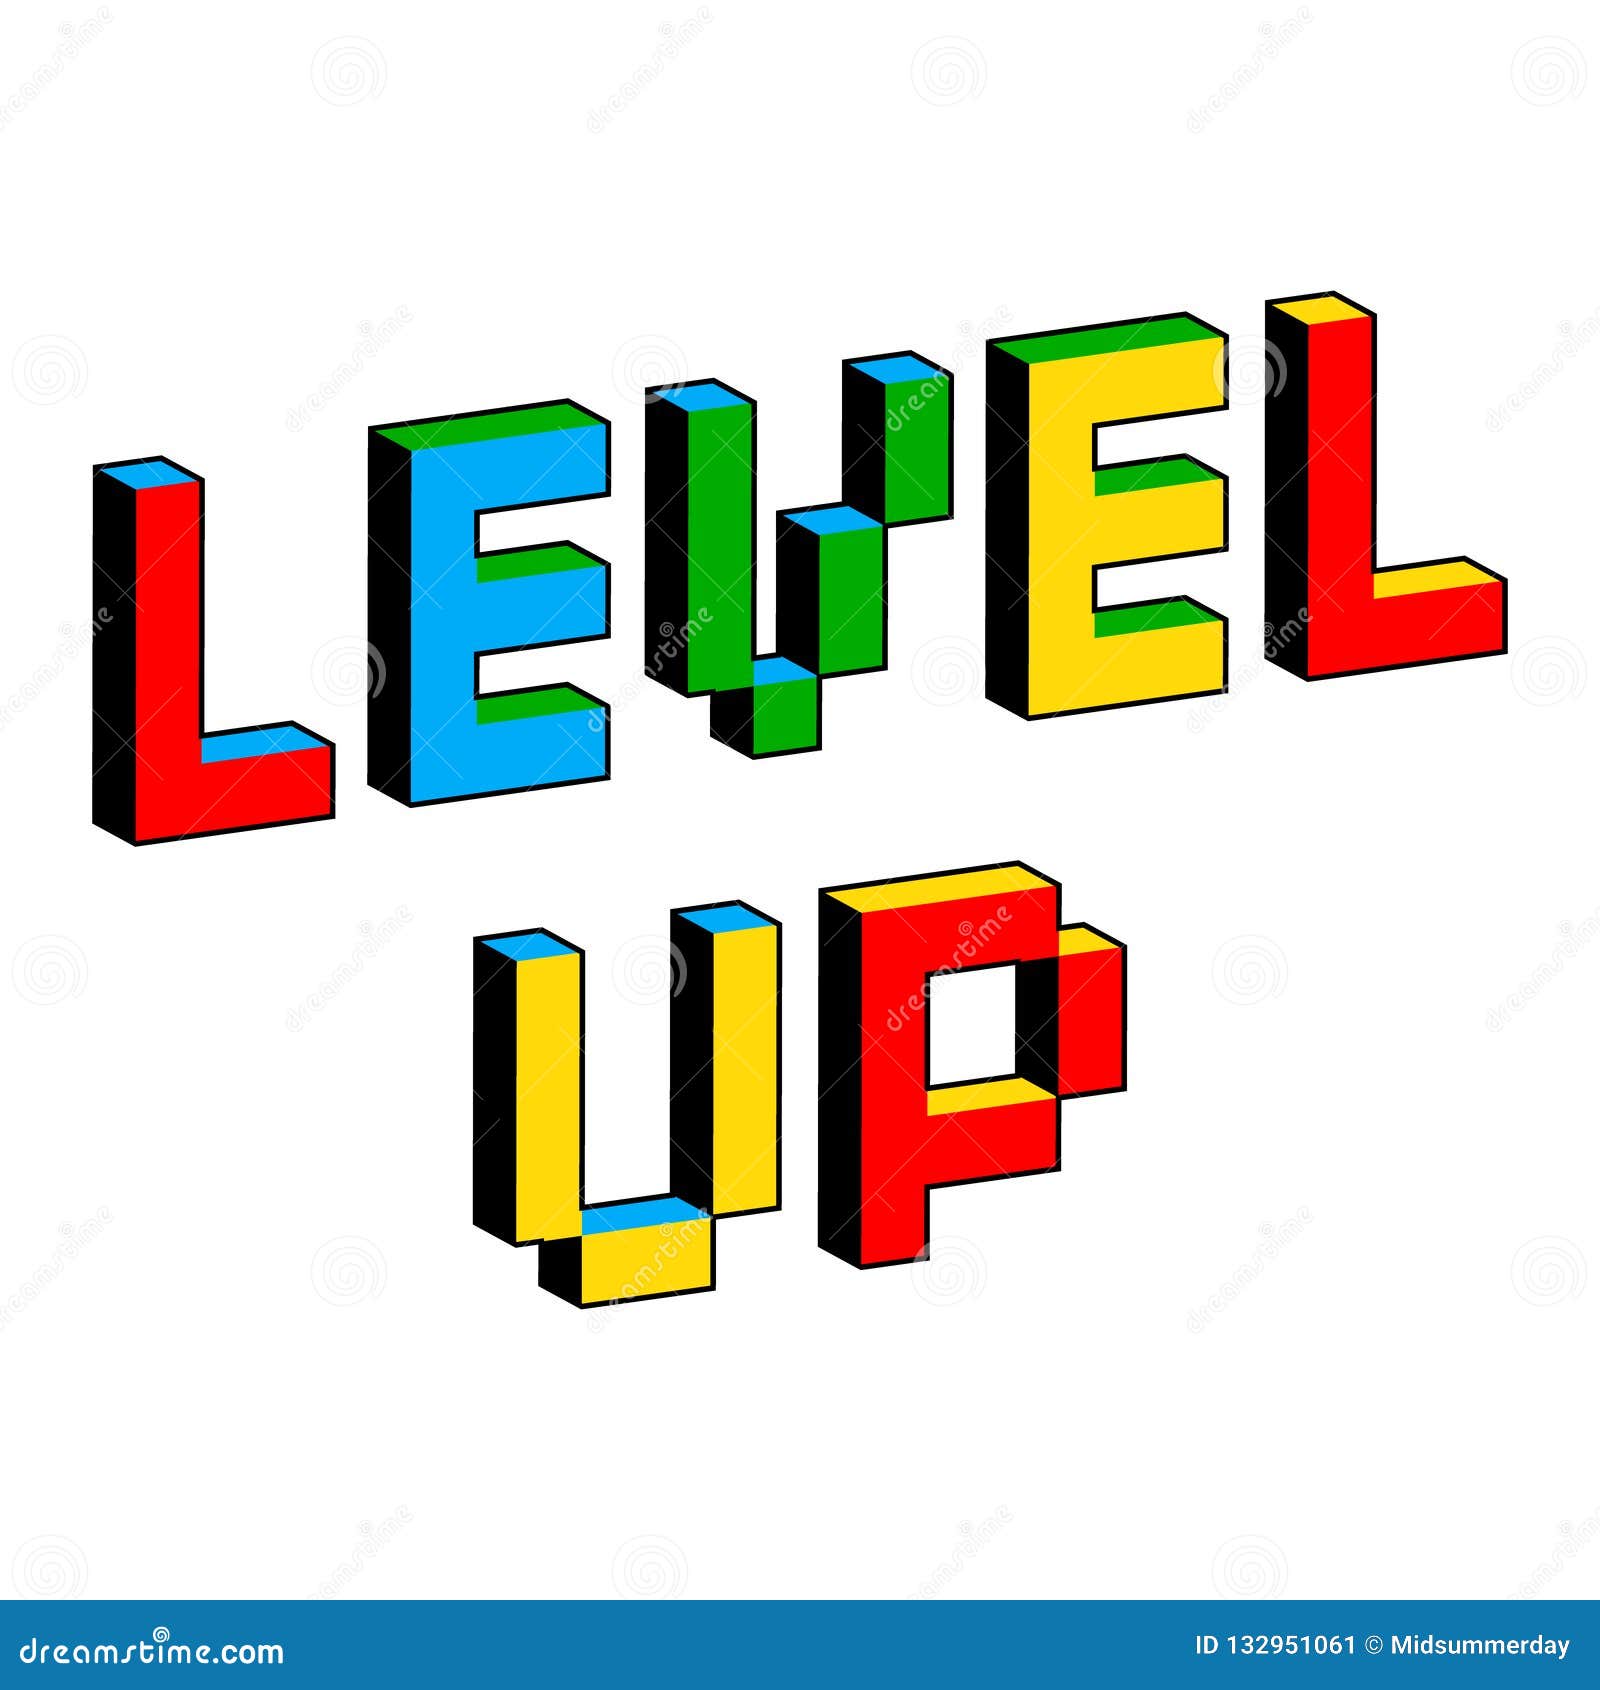 level up text in style of old 8-bit video games. vibrant colorful 3d pixel letters. creative digital  poster